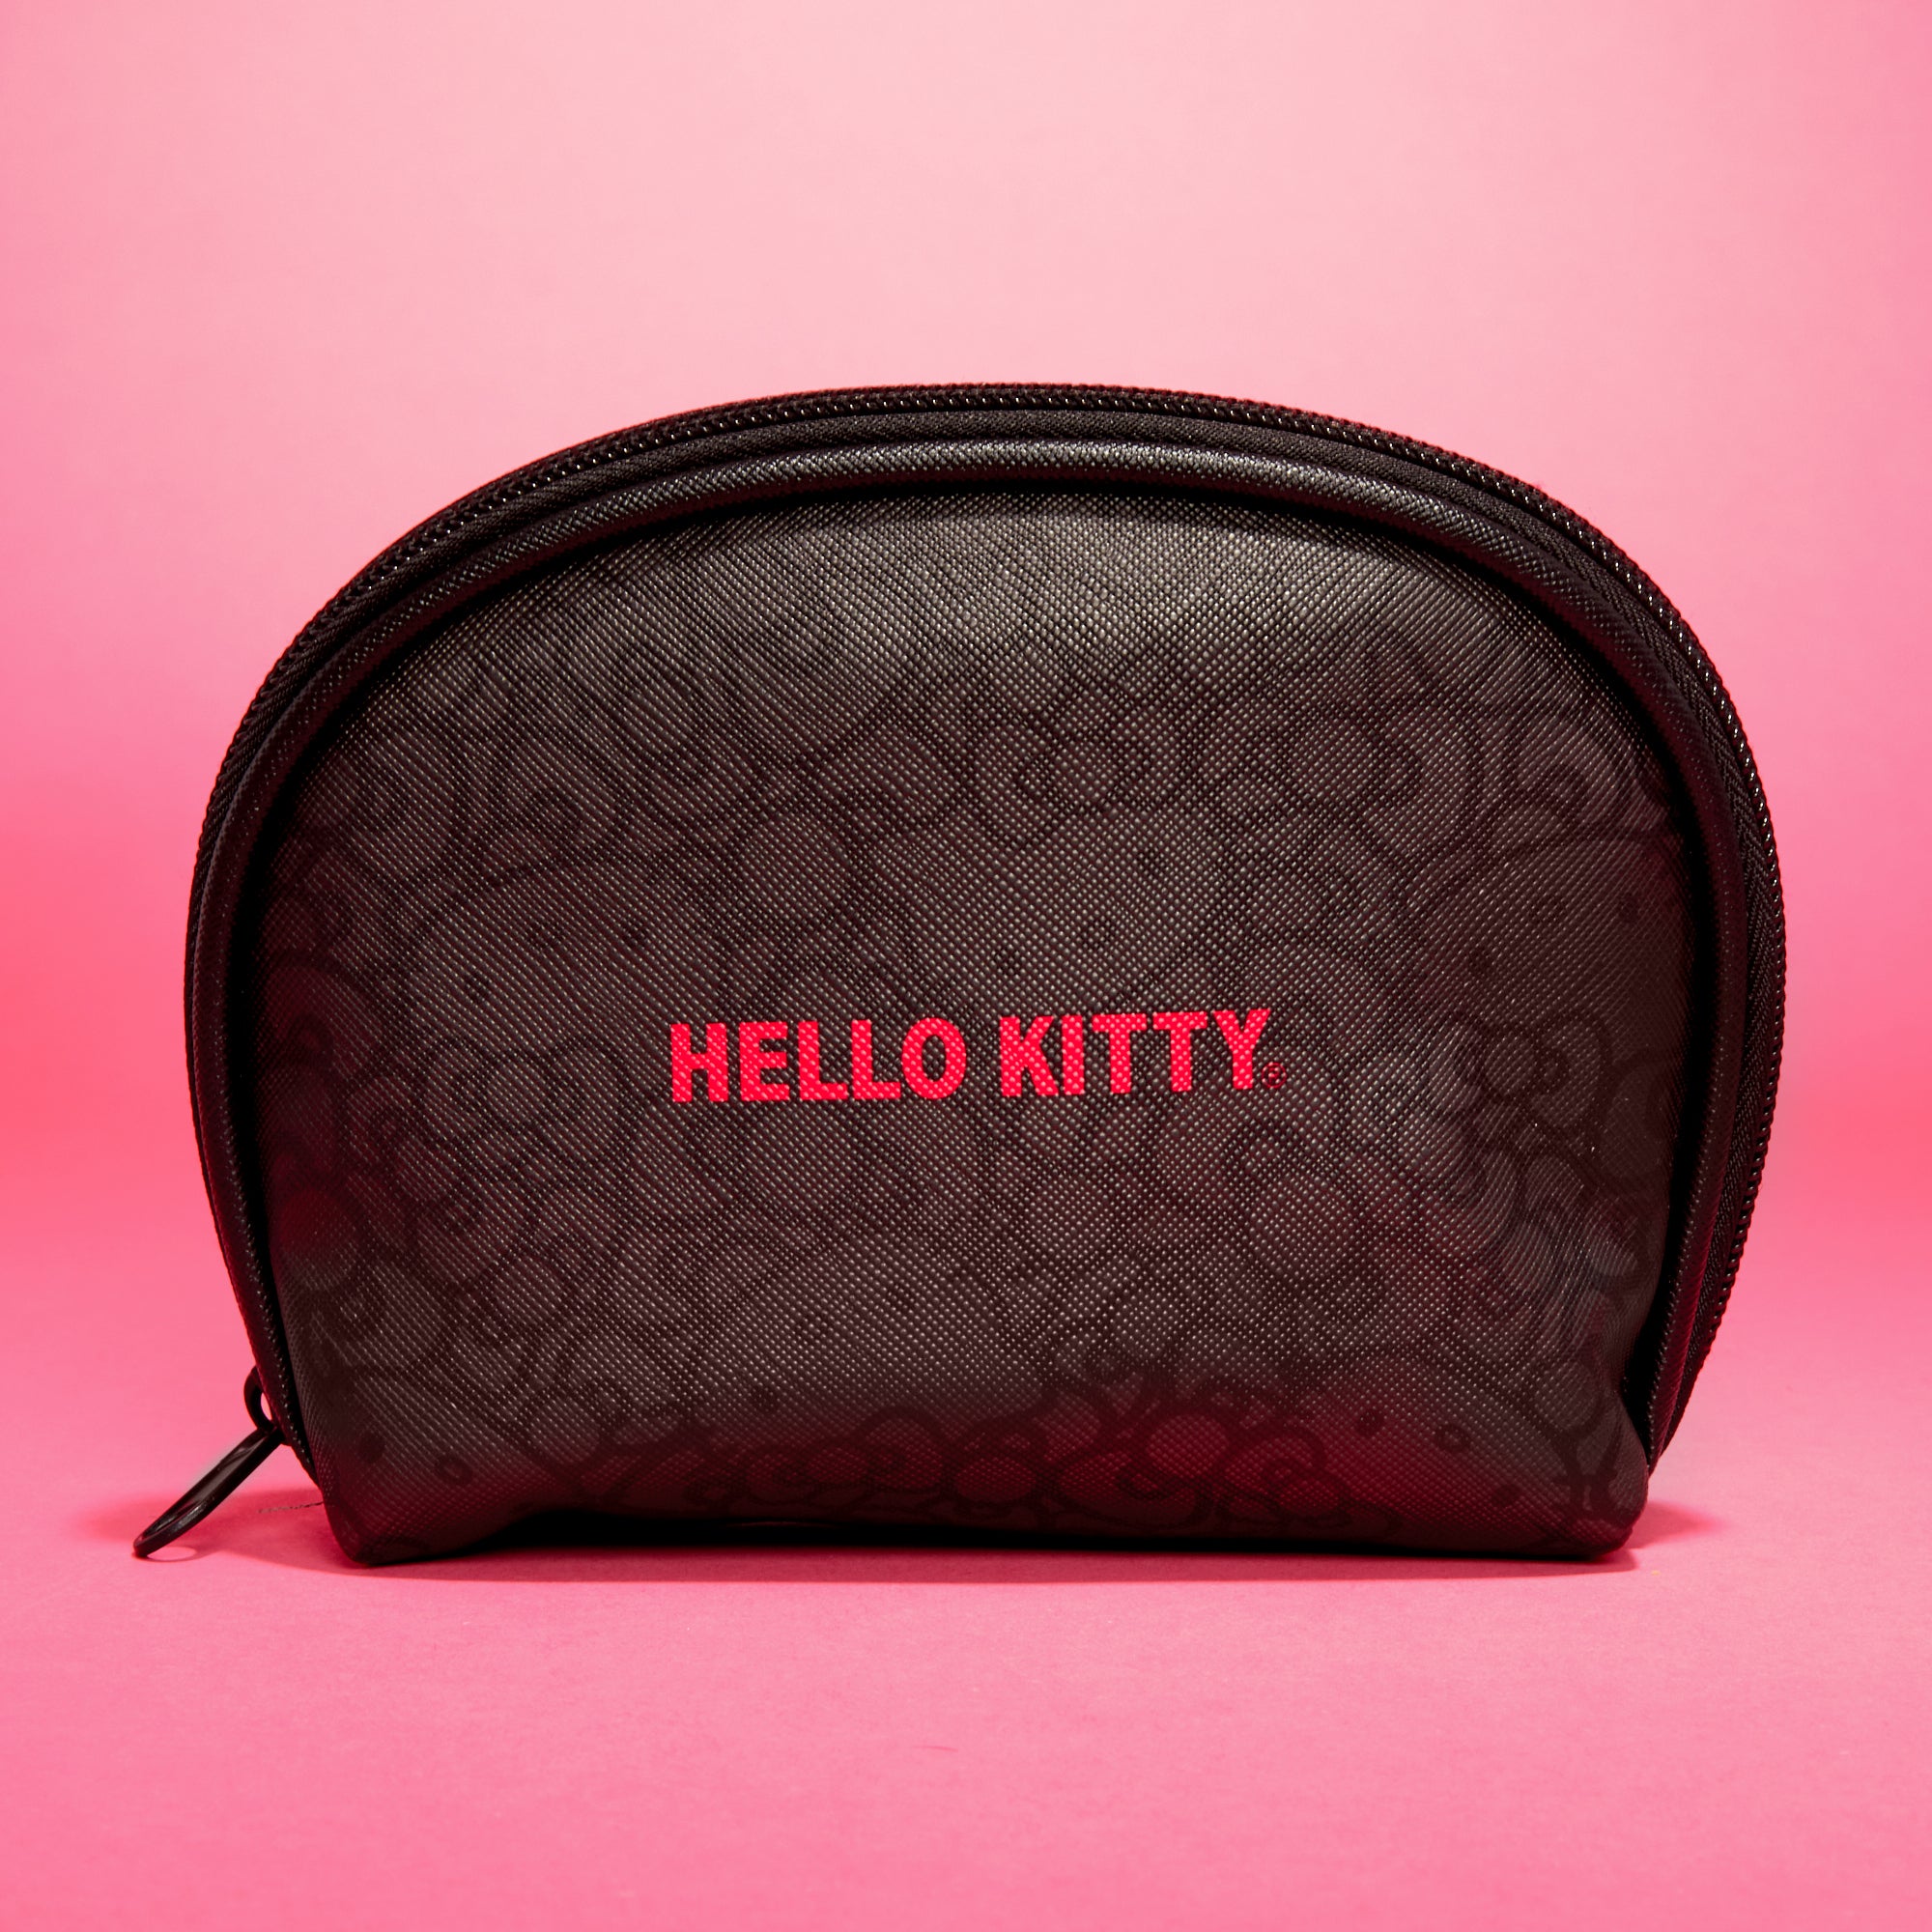 Hello Kitty Pink Carryall Tote (High Impact Series)